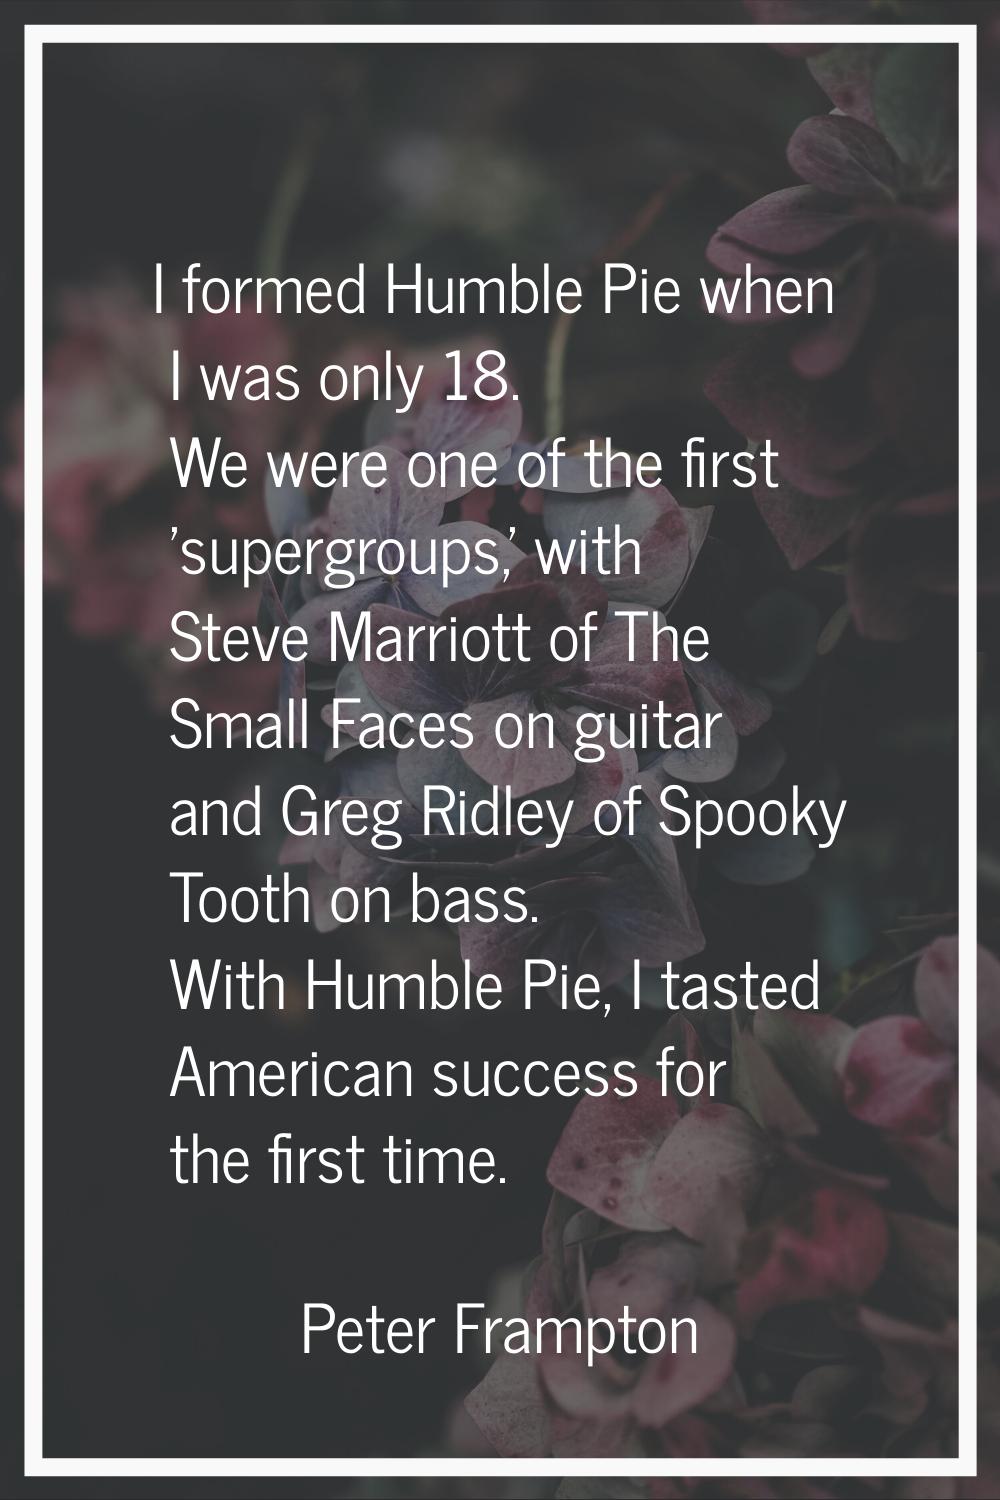 I formed Humble Pie when I was only 18. We were one of the first 'supergroups,' with Steve Marriott